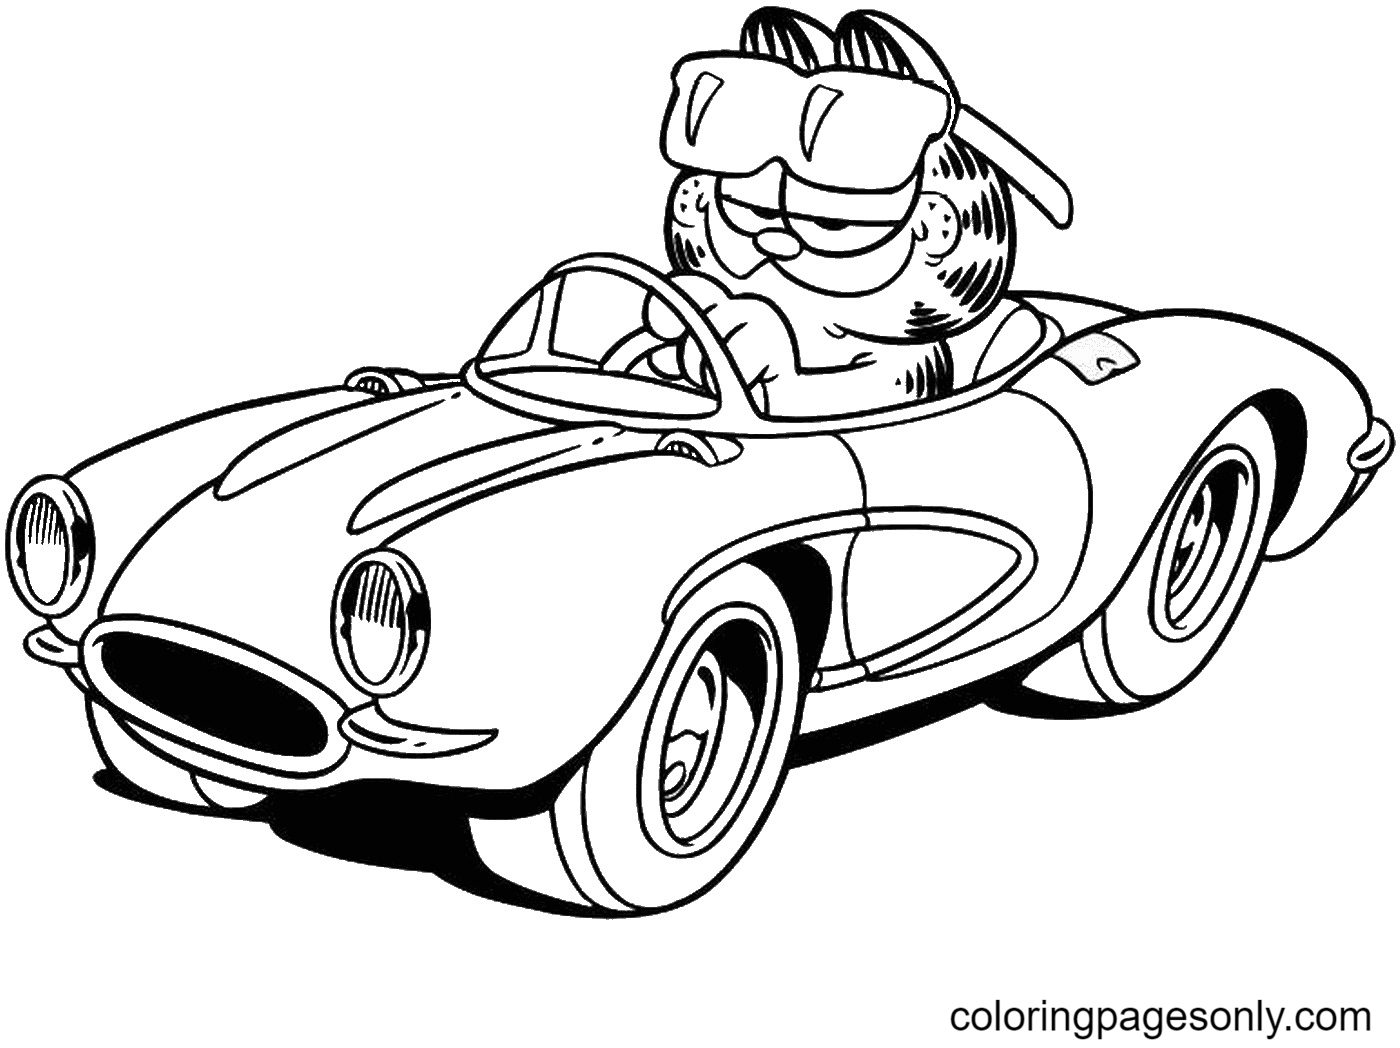 Garfield On The Car Coloring Pages